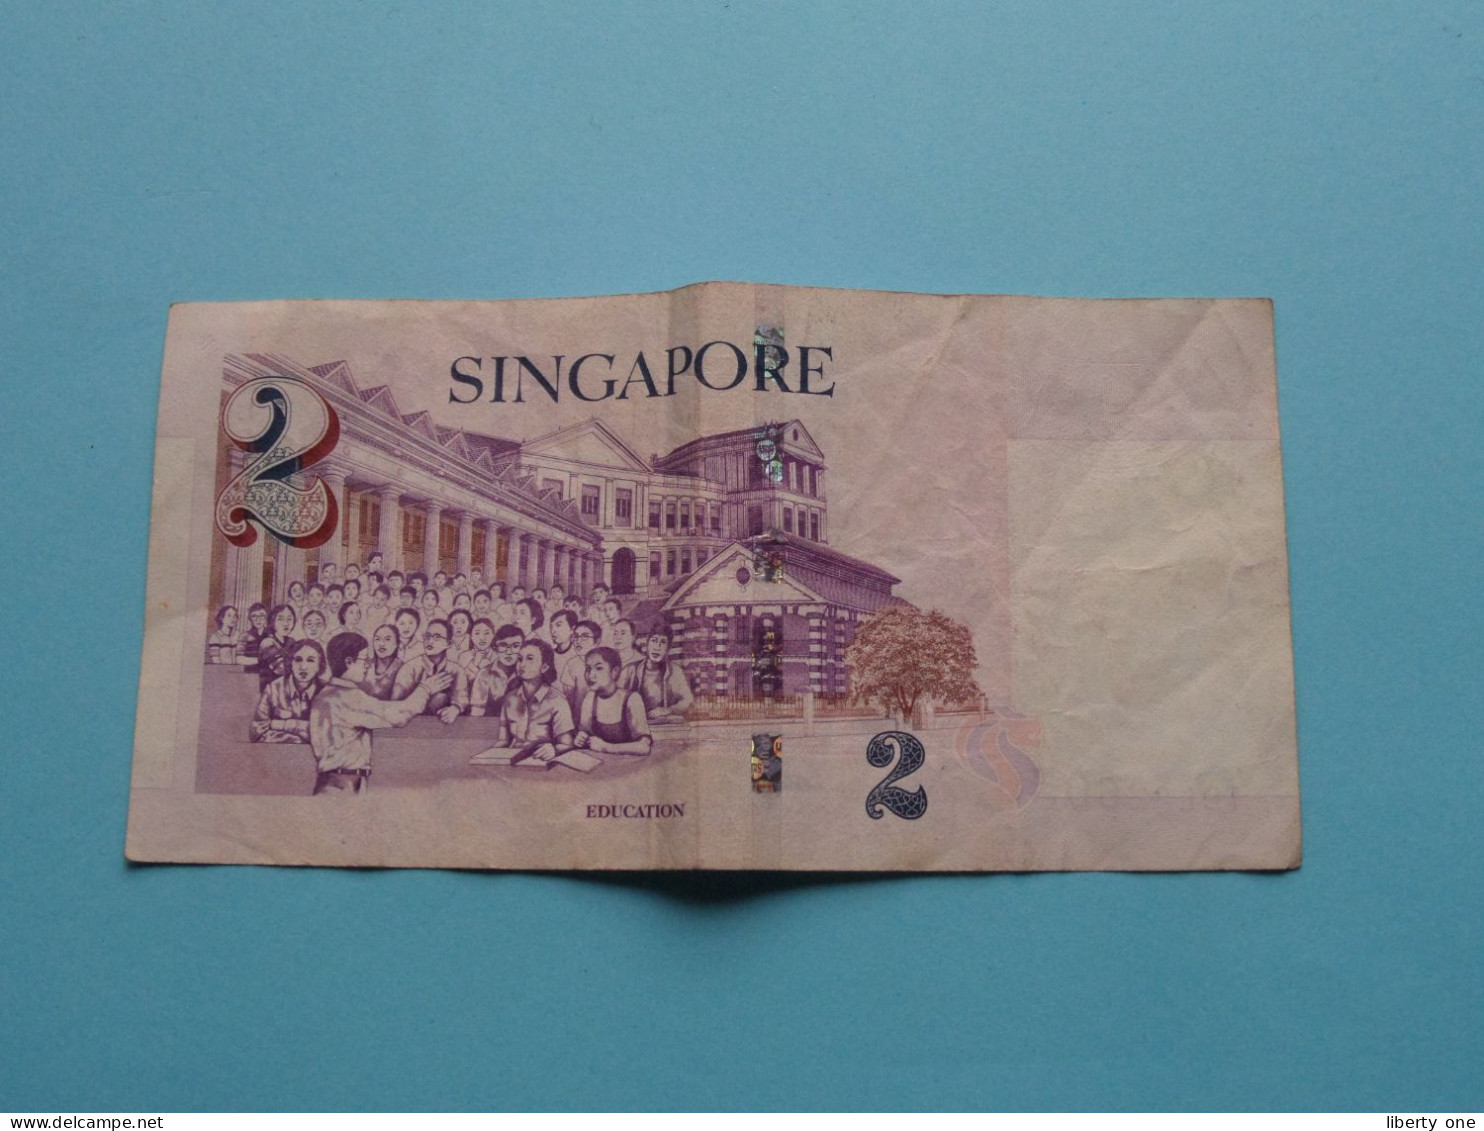 1 Lot of 48 Dollars (4x10 - 1x5 - 1x2 - 1x1 Dollar ) SINGAPORE ( for Grade, please see SCANS ) Circulated !